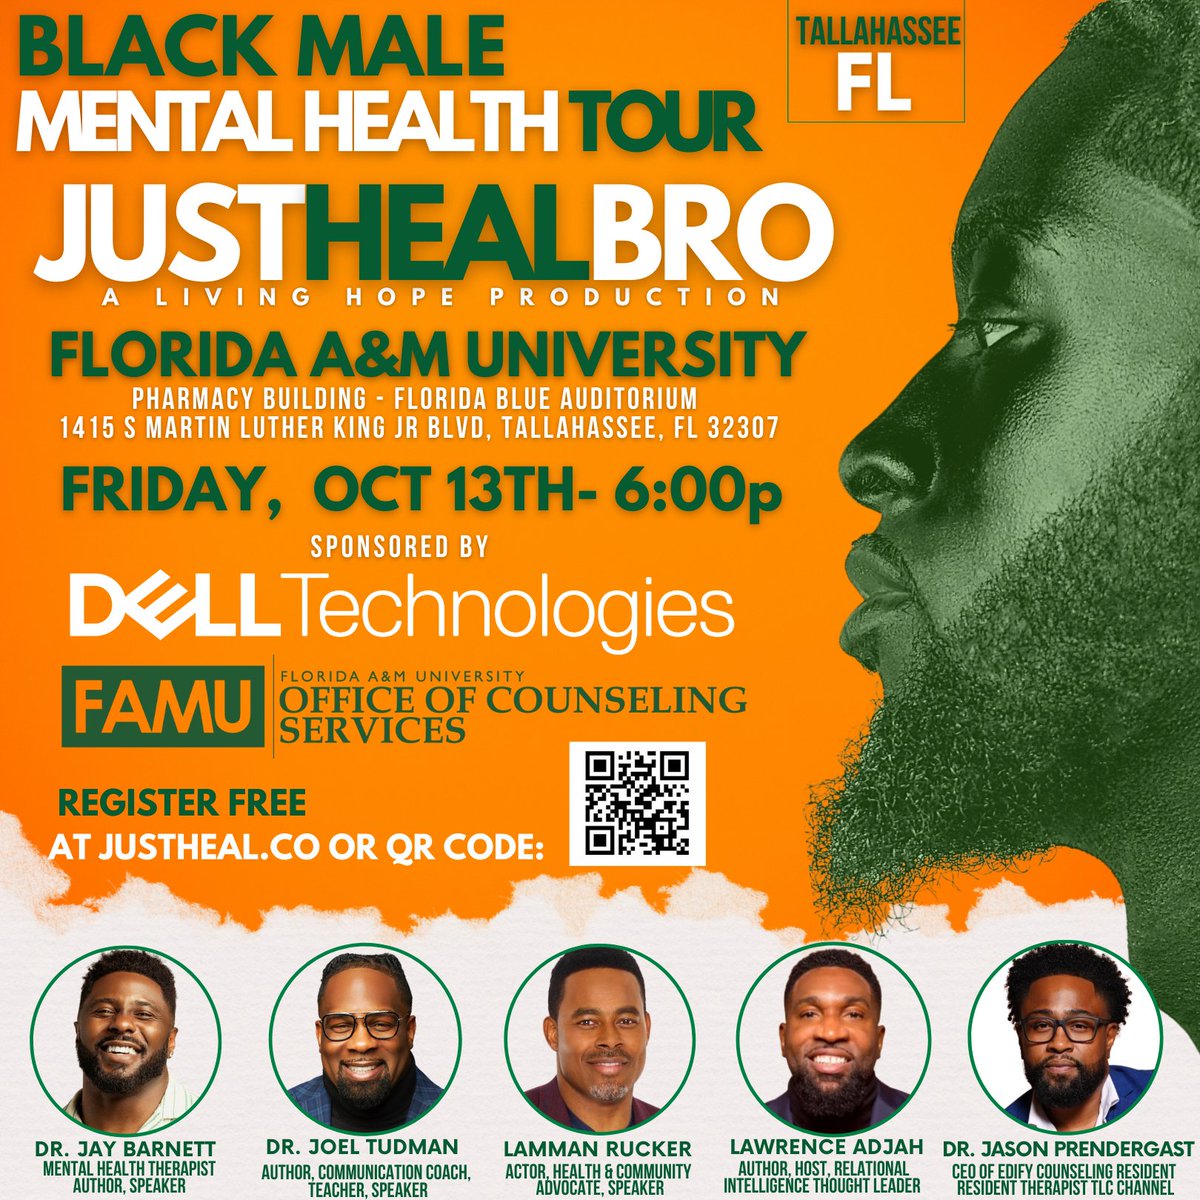 We are excited for the Black Male #MentalHealth Tour coming to Tallahassee. Register today at: justheal.co